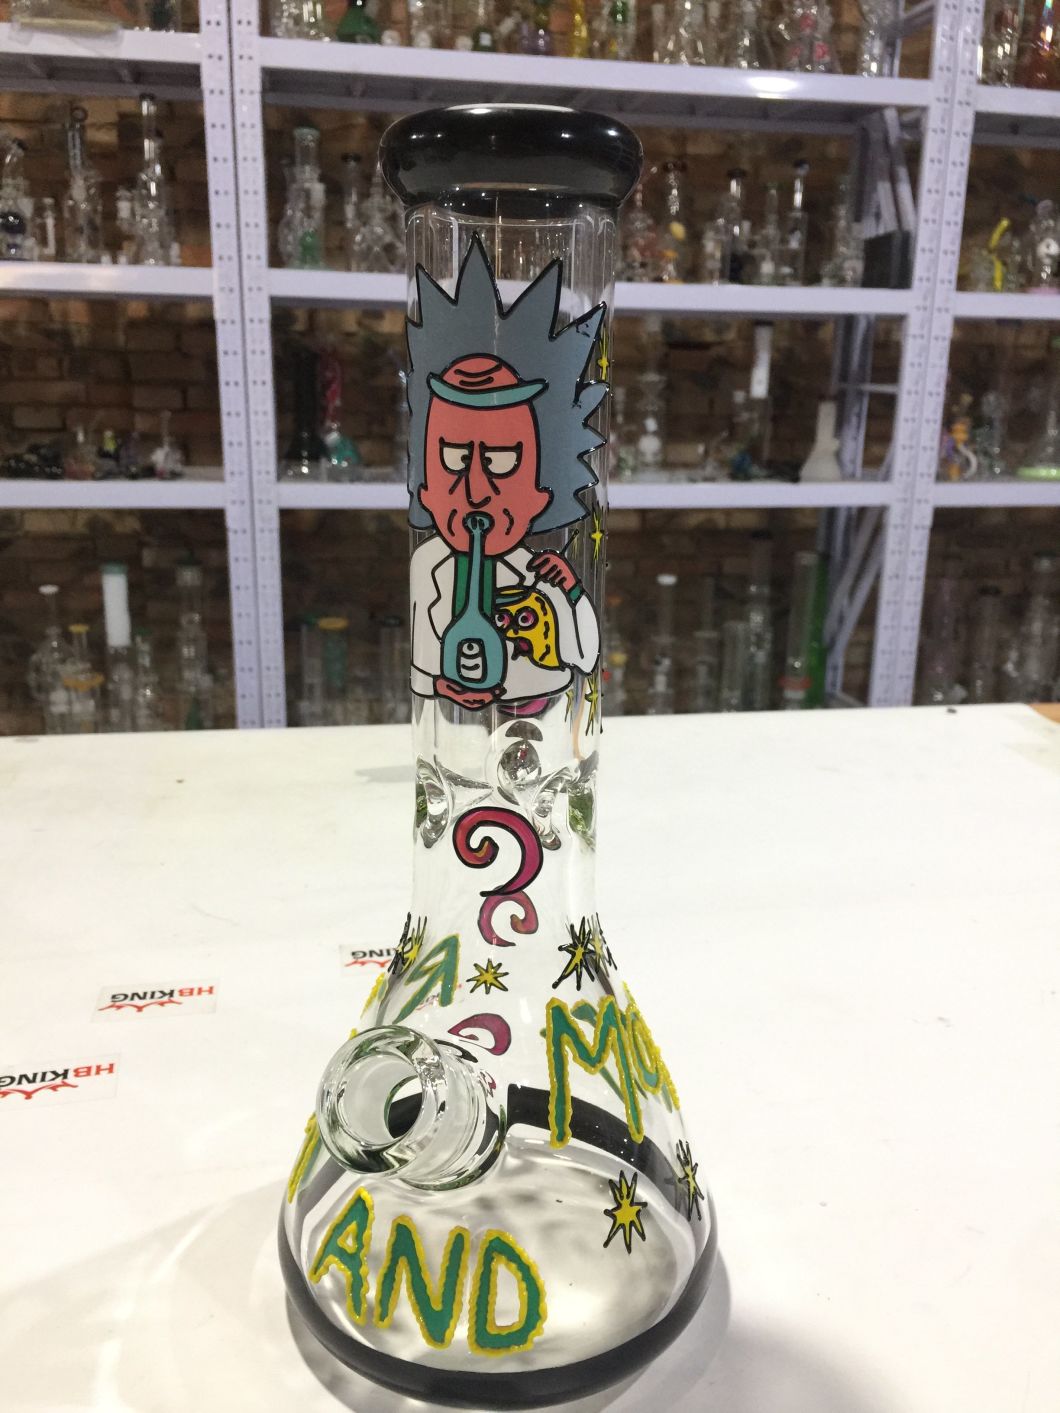 Latest Design Enjoylife 2016 Popular Rocket Inline Percolator Water Pipe with Cheap Price Rick and Morty Beaker